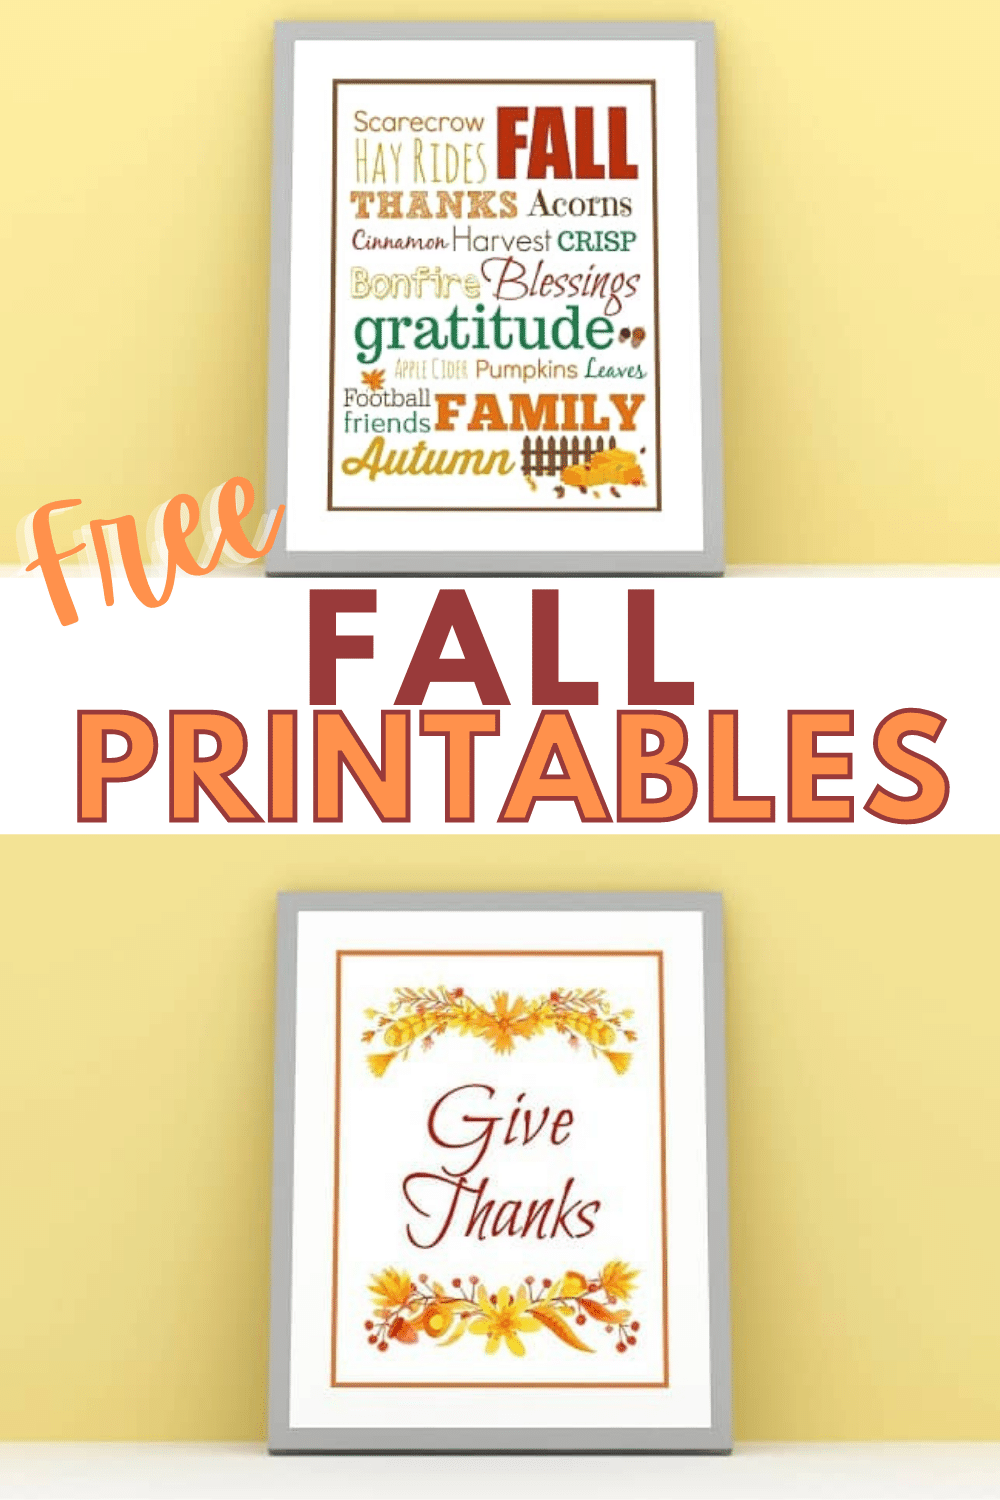 These Fall printables are a cute and easy way to decorate your house for fall. Just print and frame! #printables #fallprintables #freeprintables #fall via @wondermomwannab